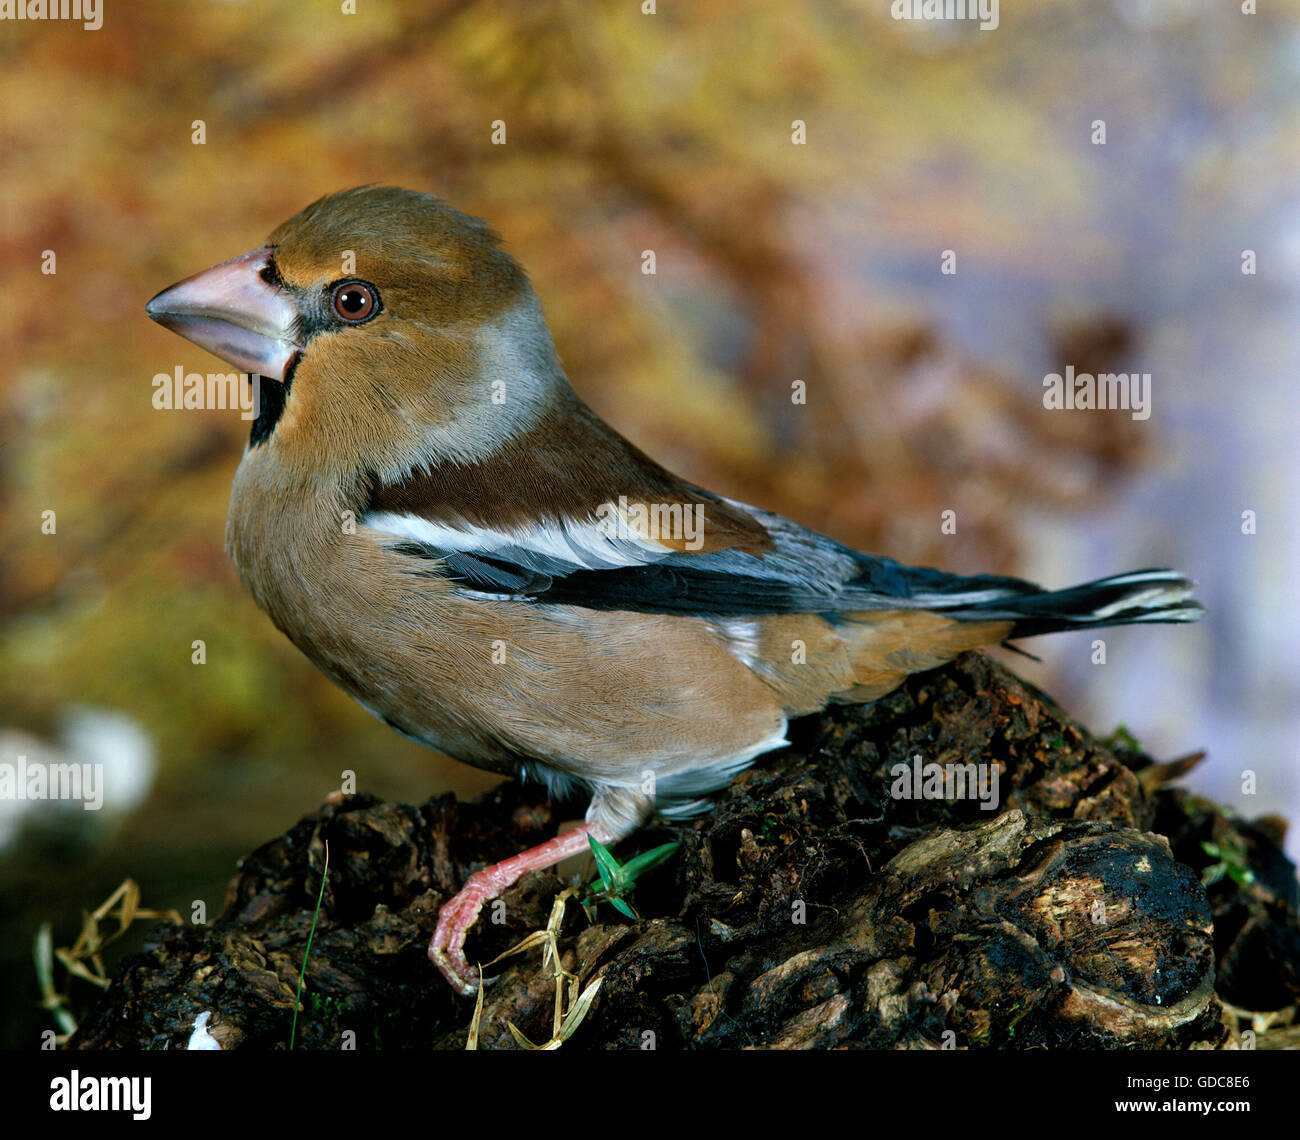 Hawfinch, coccothraustes coccothraustes, Male on Branch Stock Photo